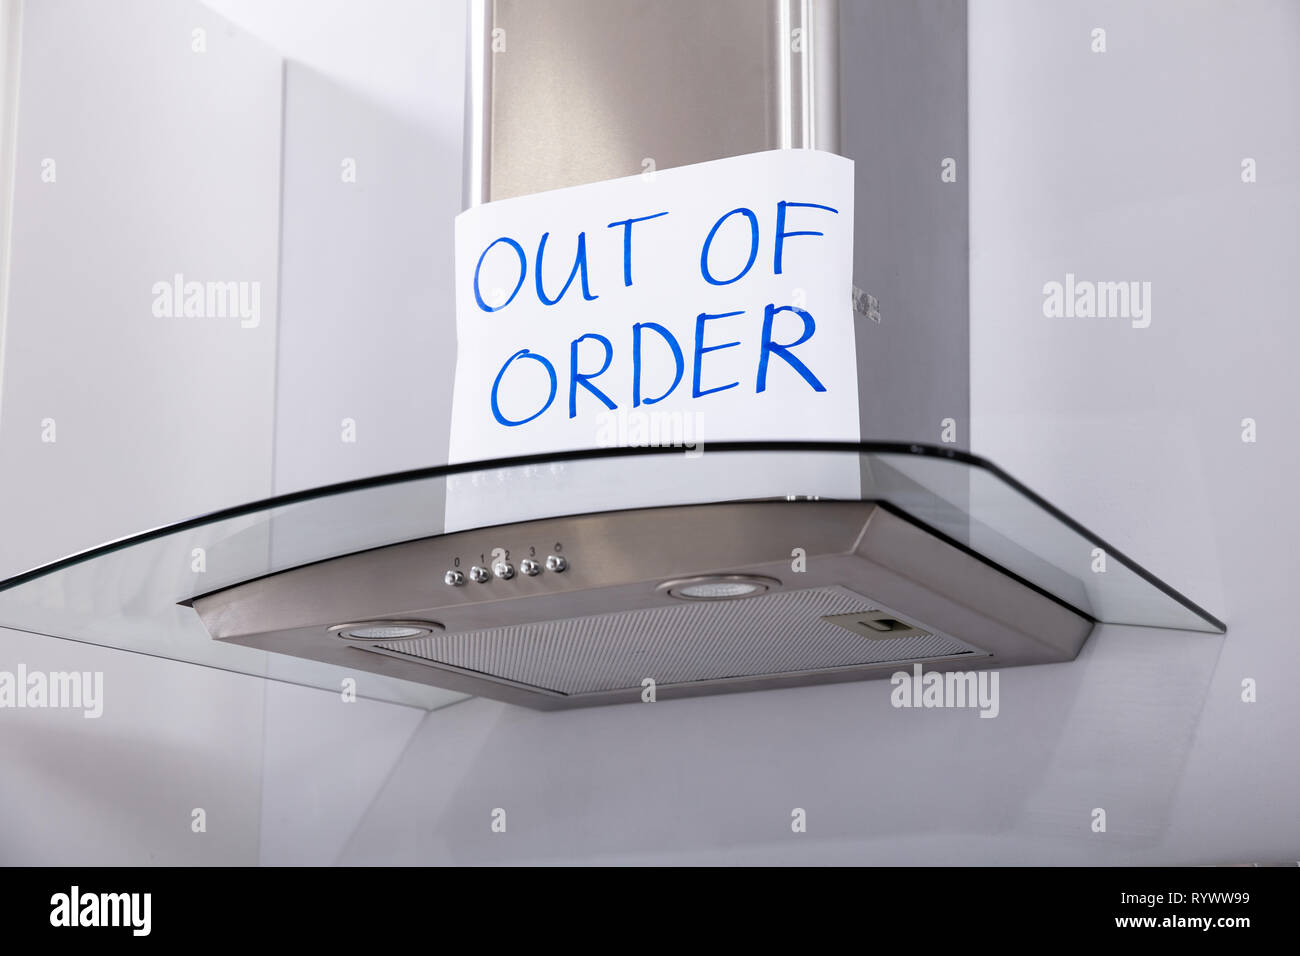 Written Text Out Of Order Message On Paper Over The Stuck Extractor Filter In Kitchen Stock Photo